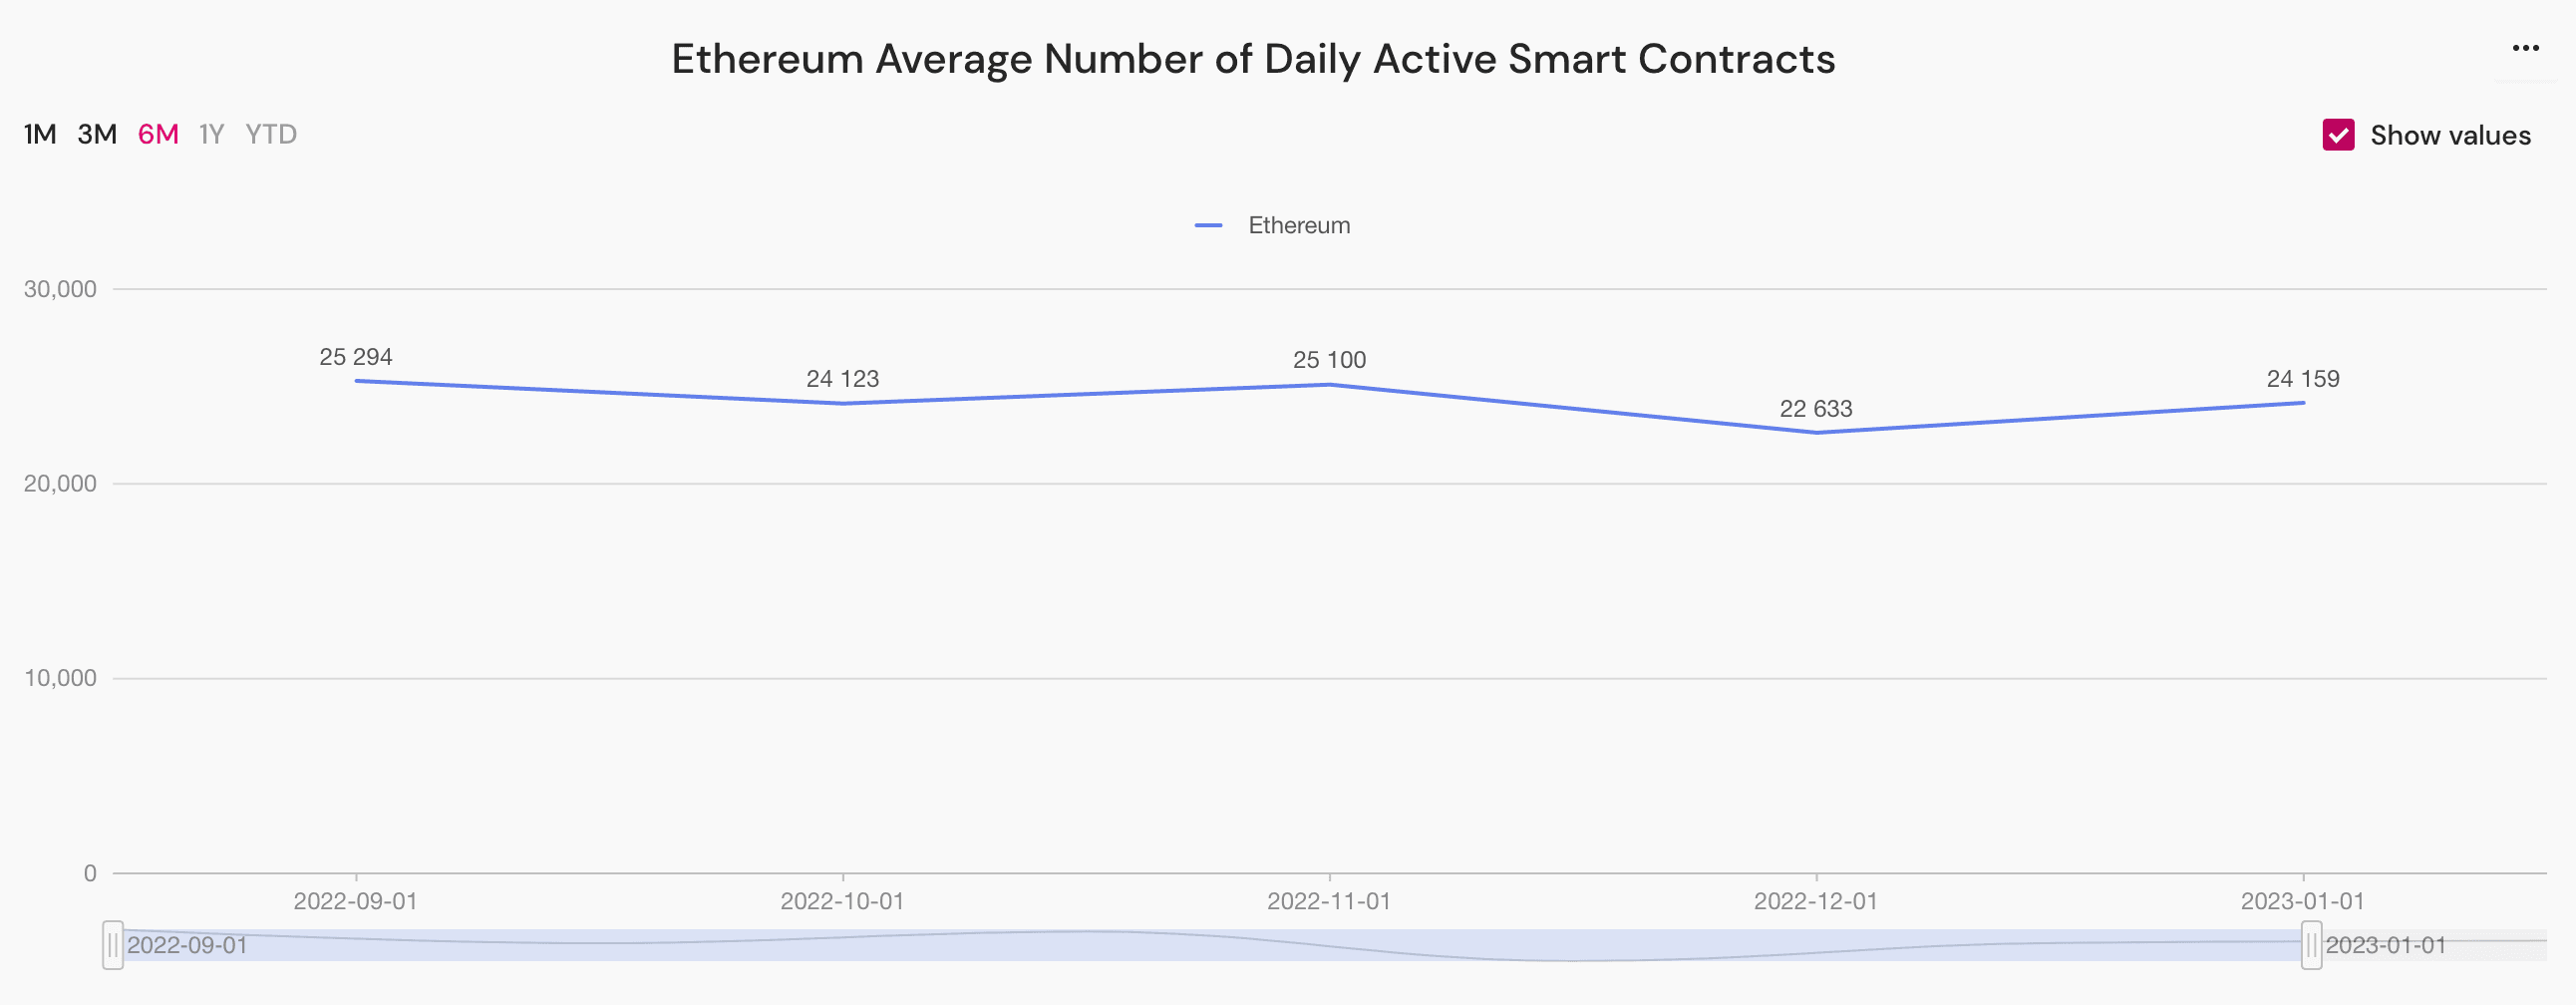 ethereum average number of daily active smart contracts